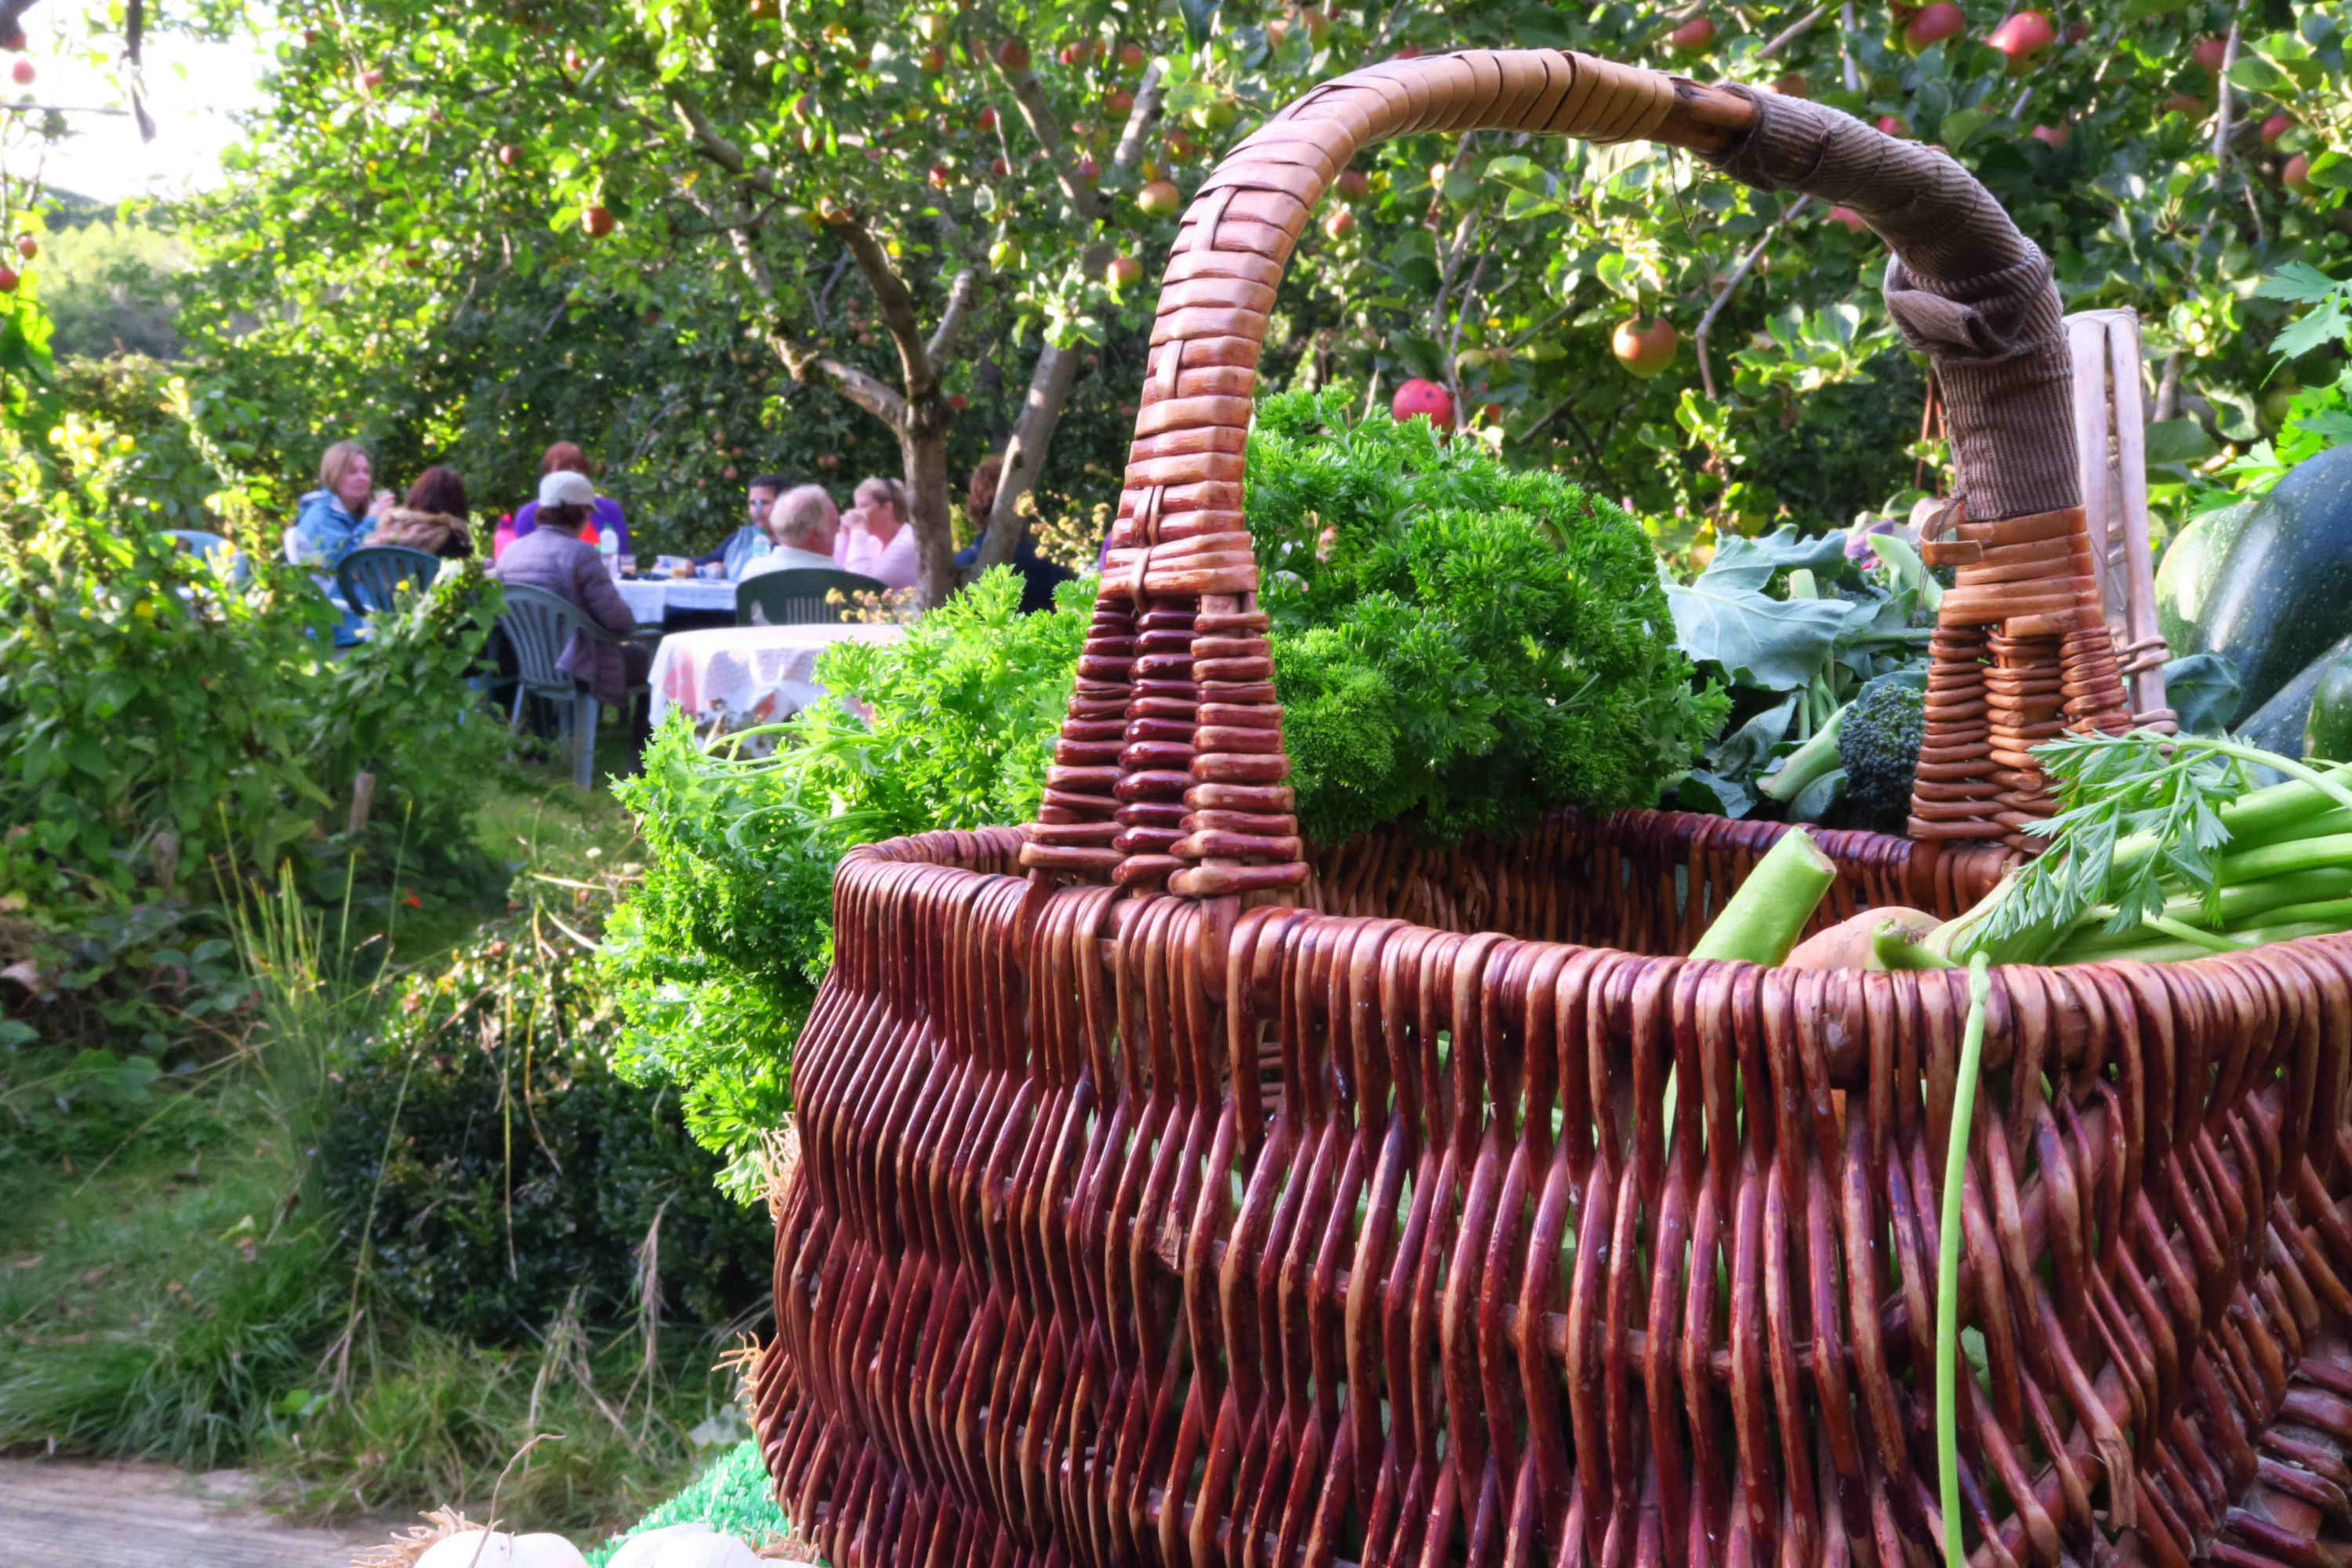 Basket and group in the orchard after a farm walk